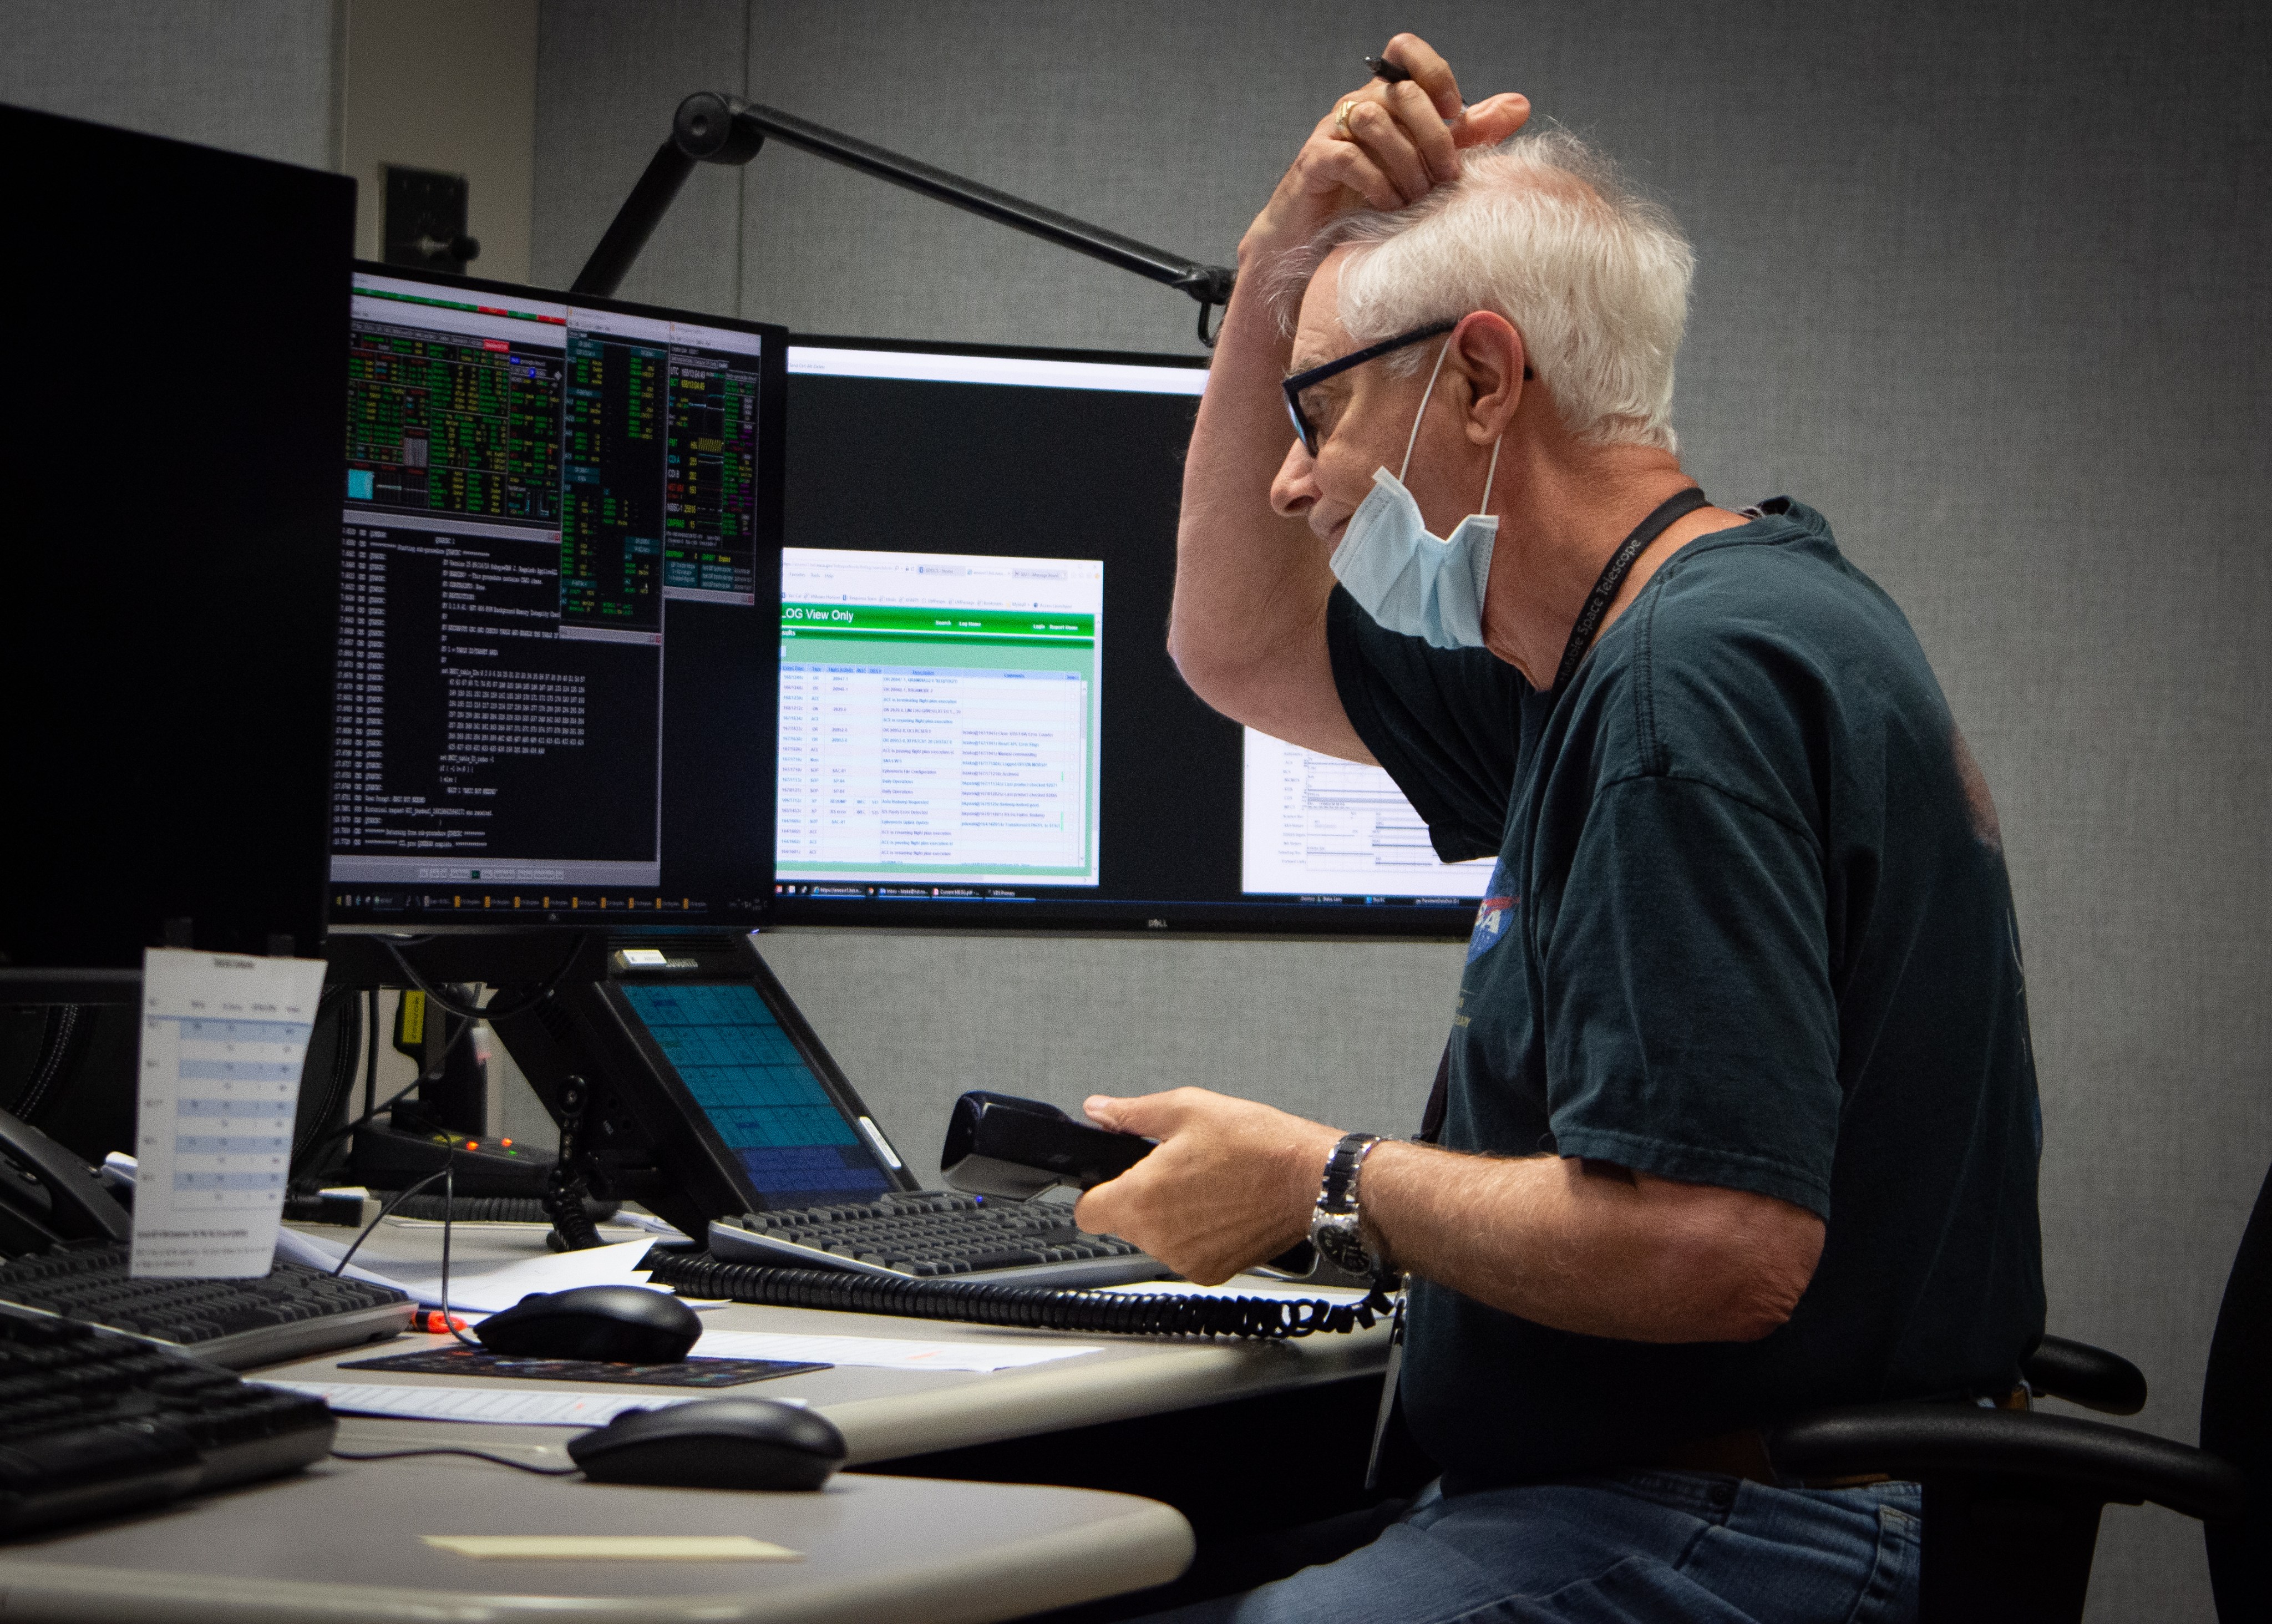 A man scratches his head in thought while holding a land line phone receiver in one hand and analyzing data on a screen in the Hubble control center.